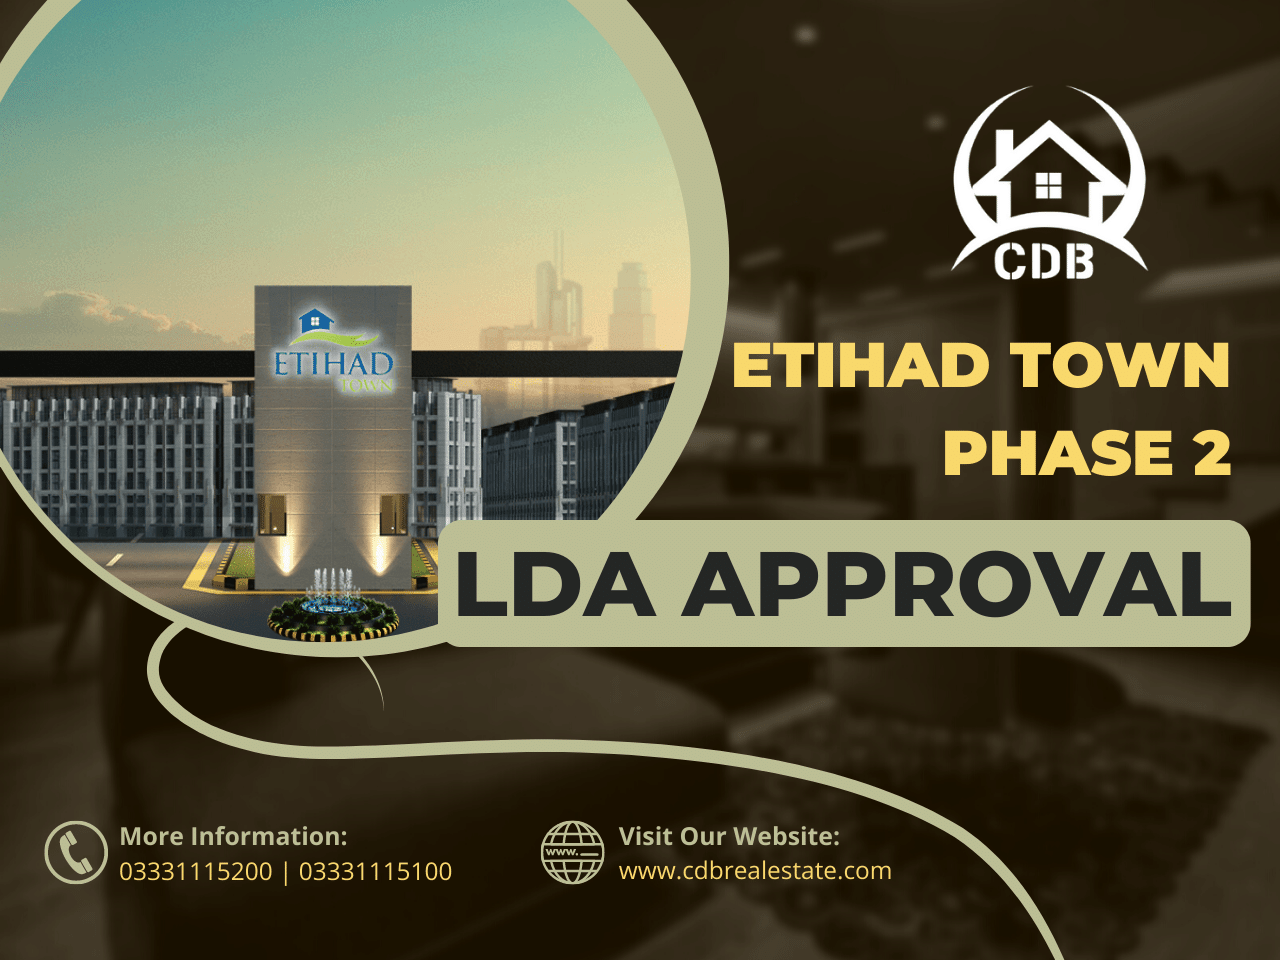 LDA Approval of Eithad Town Phase 2